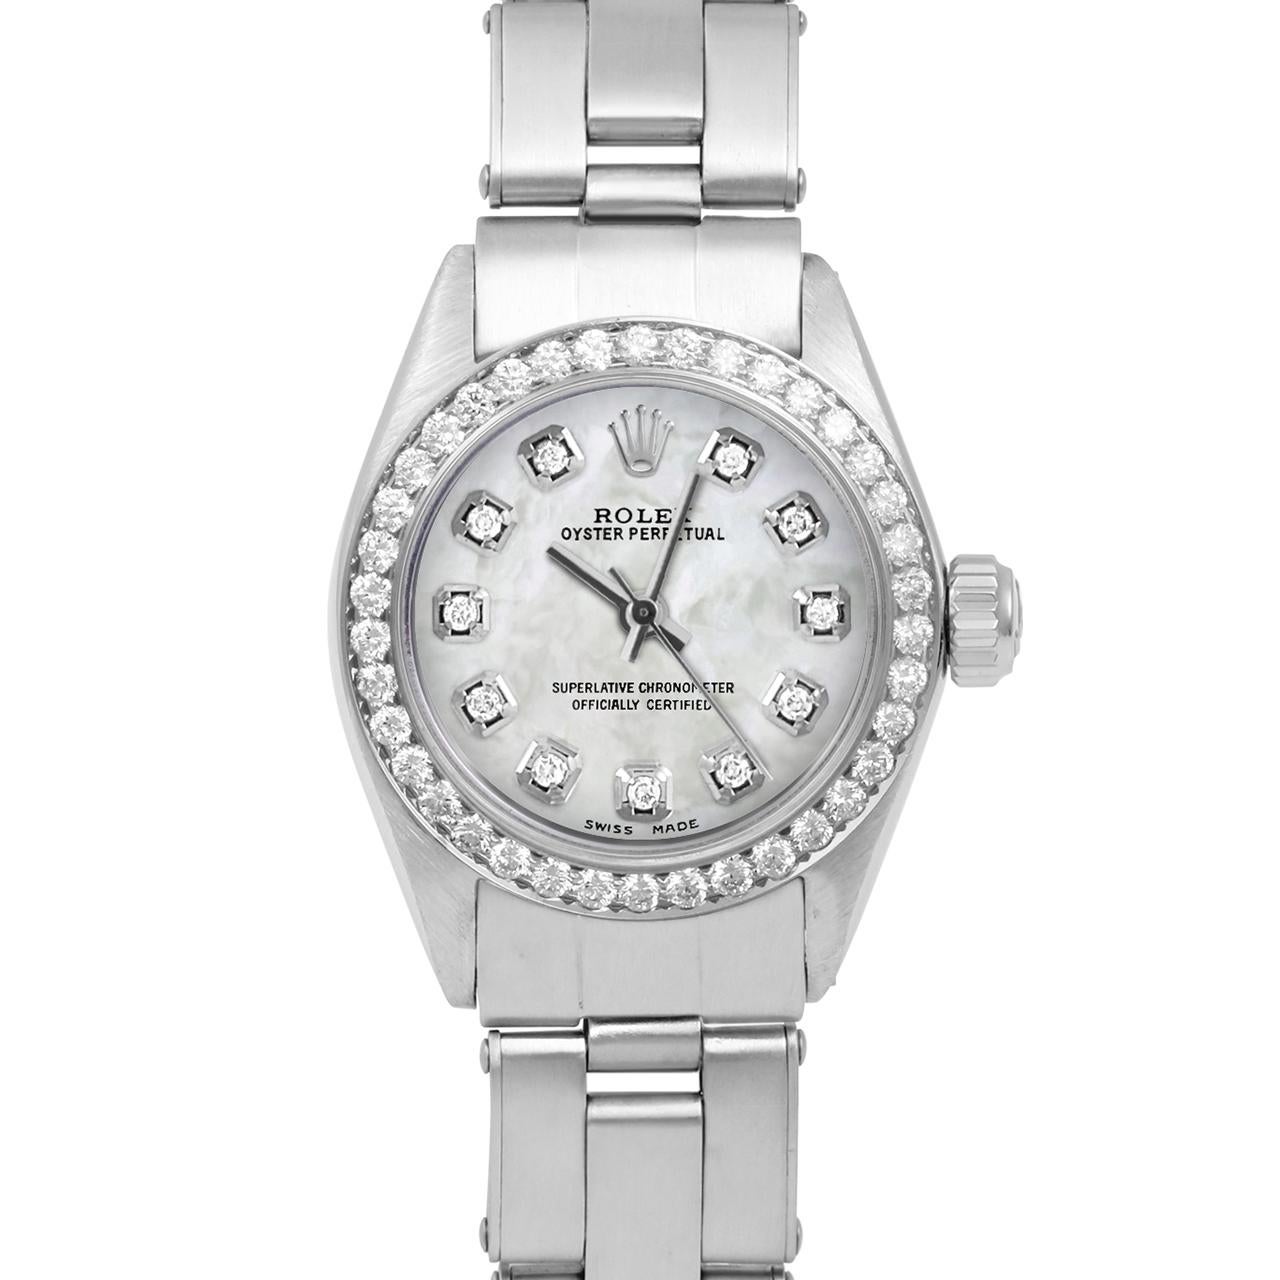 Brand : Rolex

Model : Oyster Perpetual Model

Gender : Ladies

Metals : Stainless Steel

Case Size : 24 mm

Dial : Custom Mother Of Pearl Diamond Dial (This dial is not original Rolex And has been added aftermarket yet is a beautiful Custom